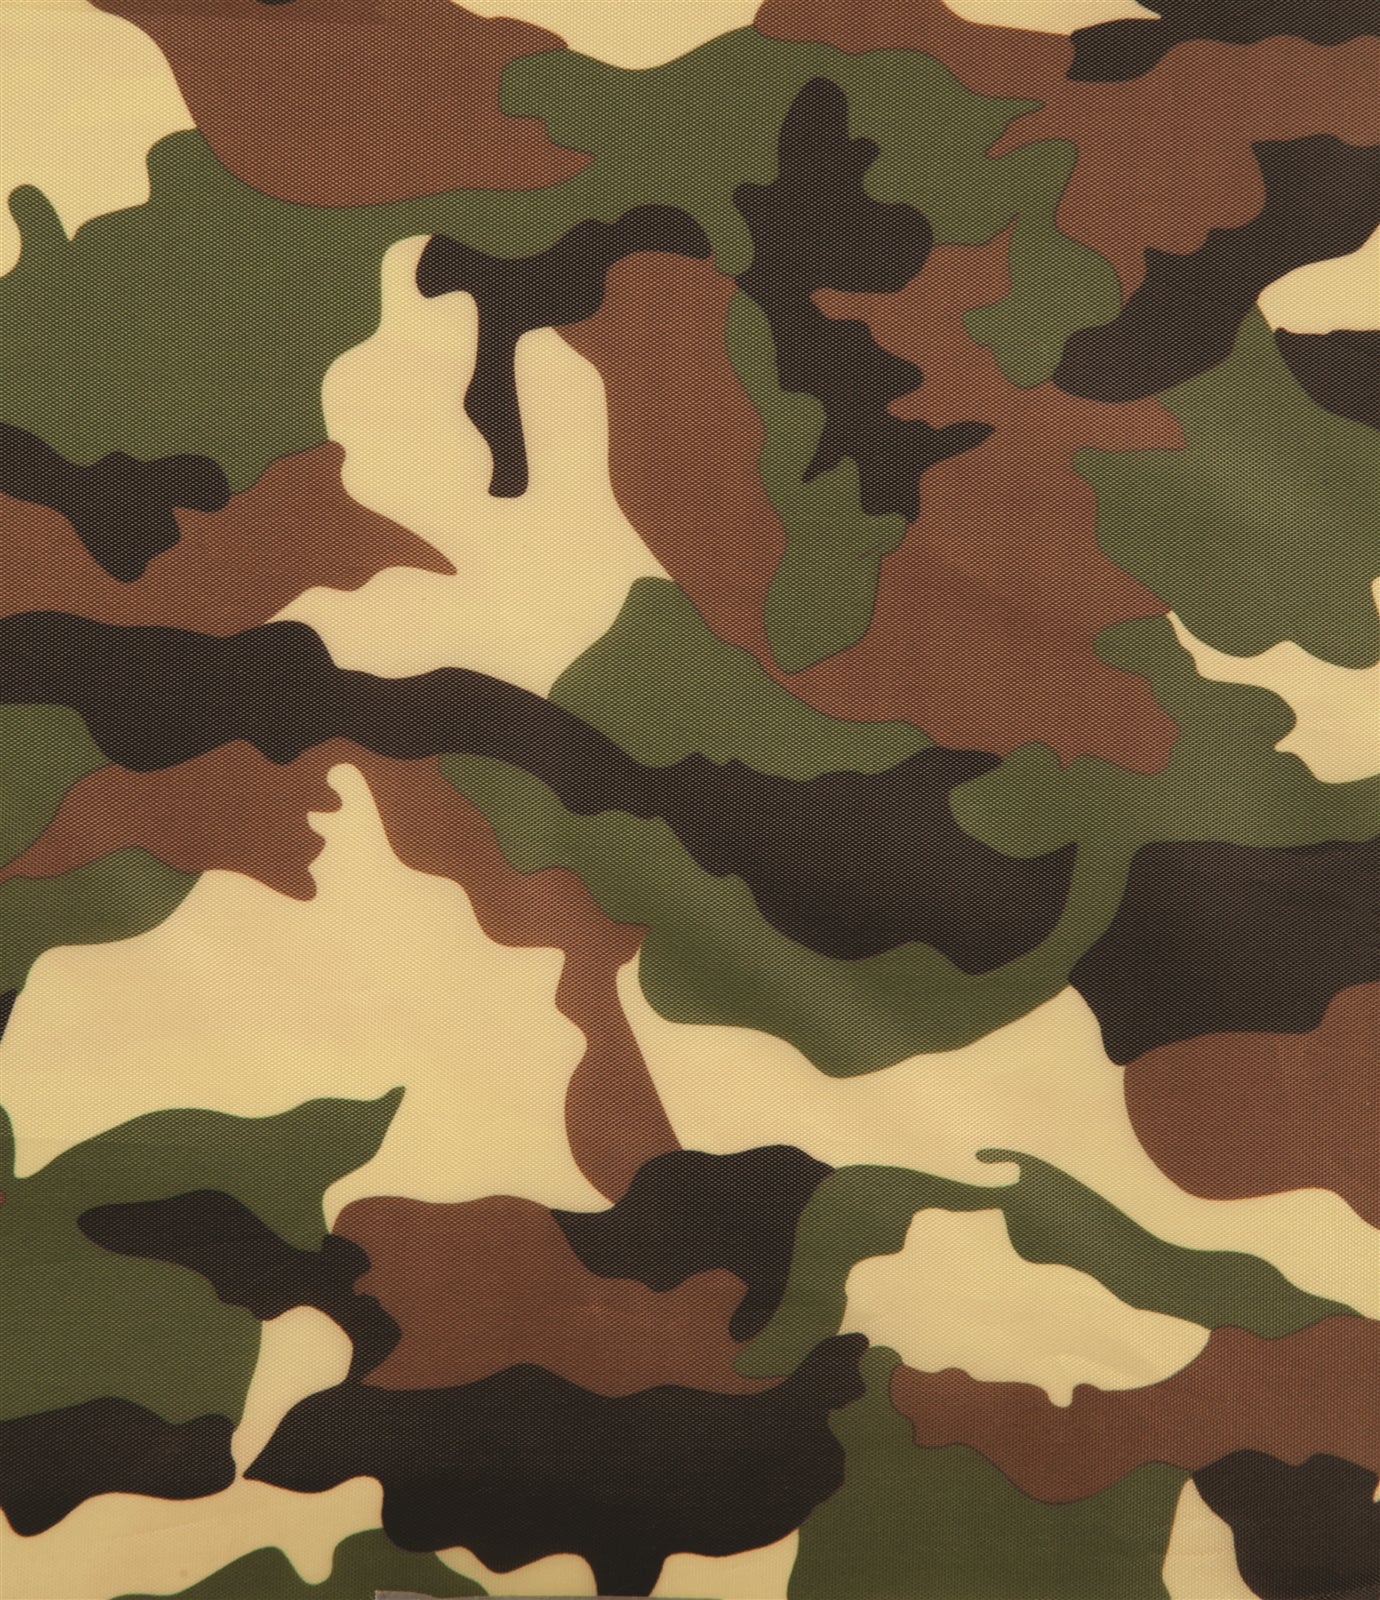 US Army Camouflage Twin Tent Bed